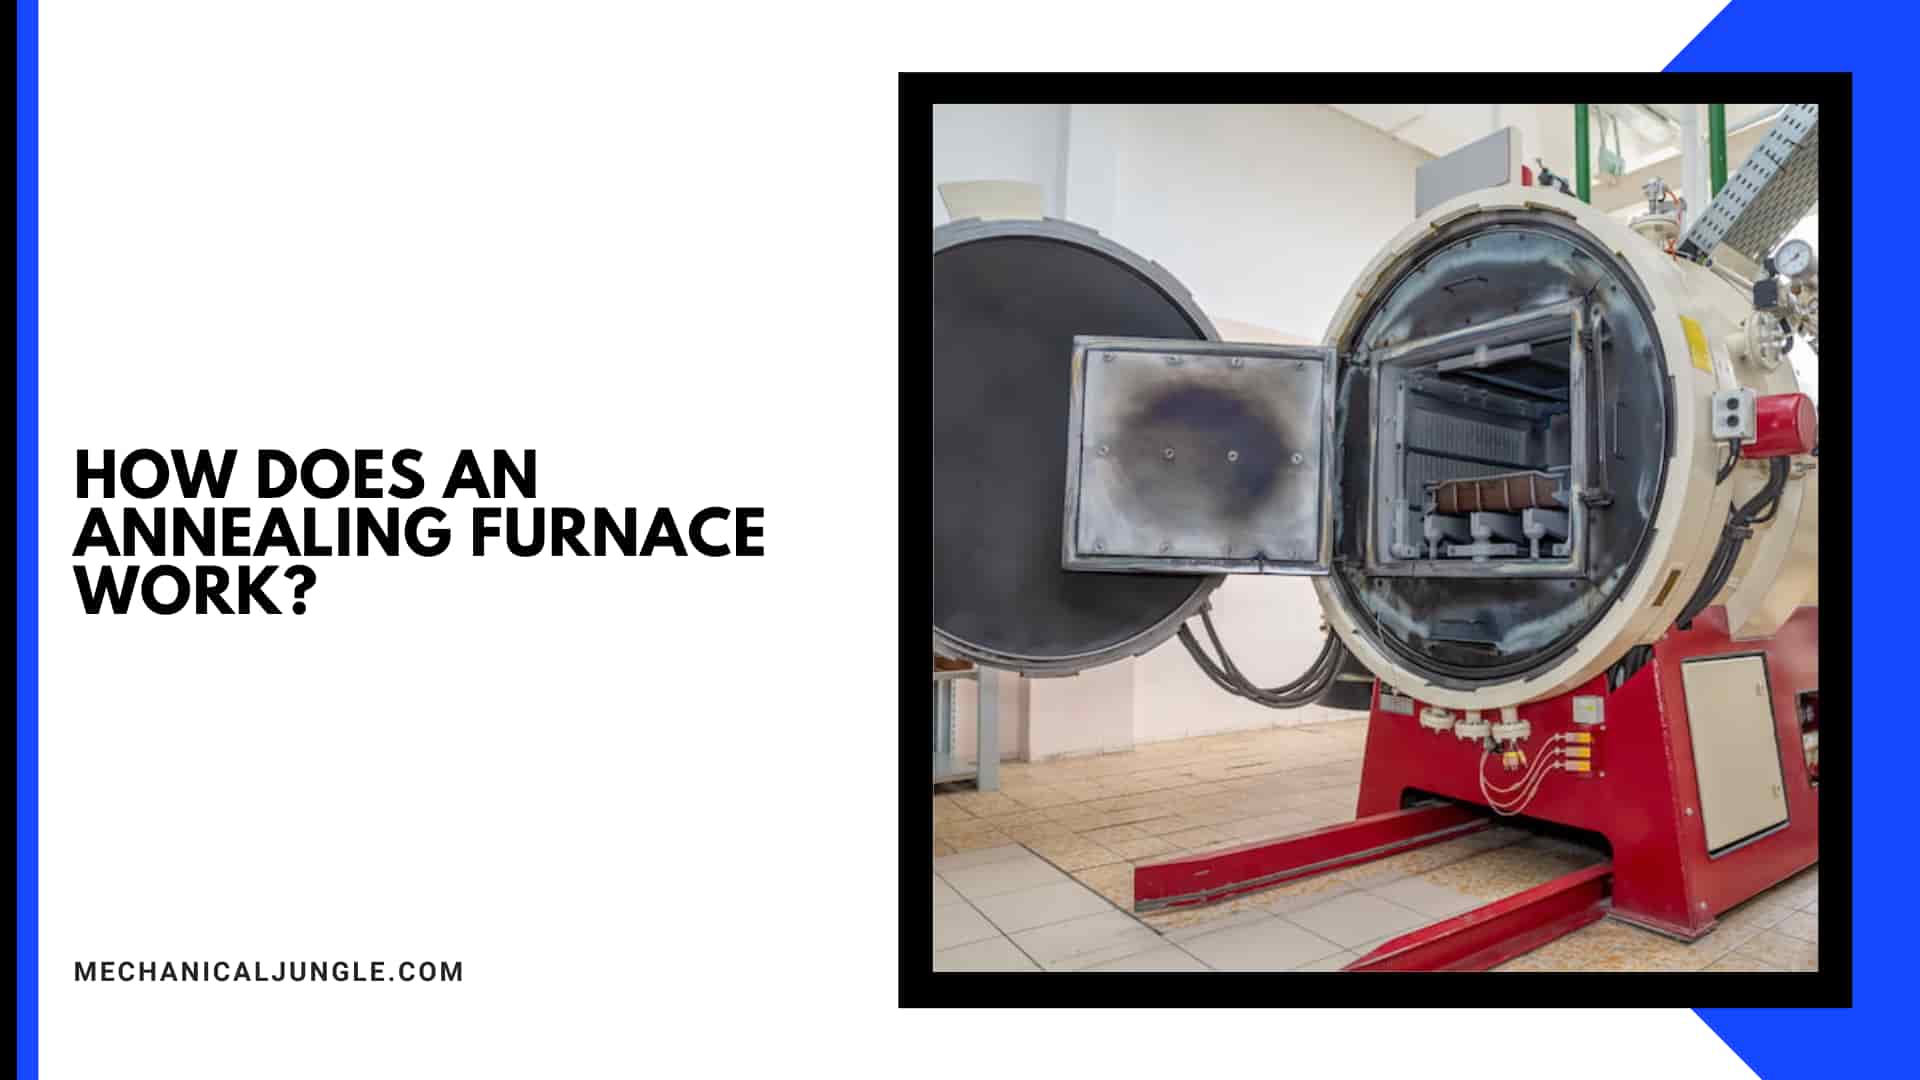 How Does an Annealing Furnace Work?